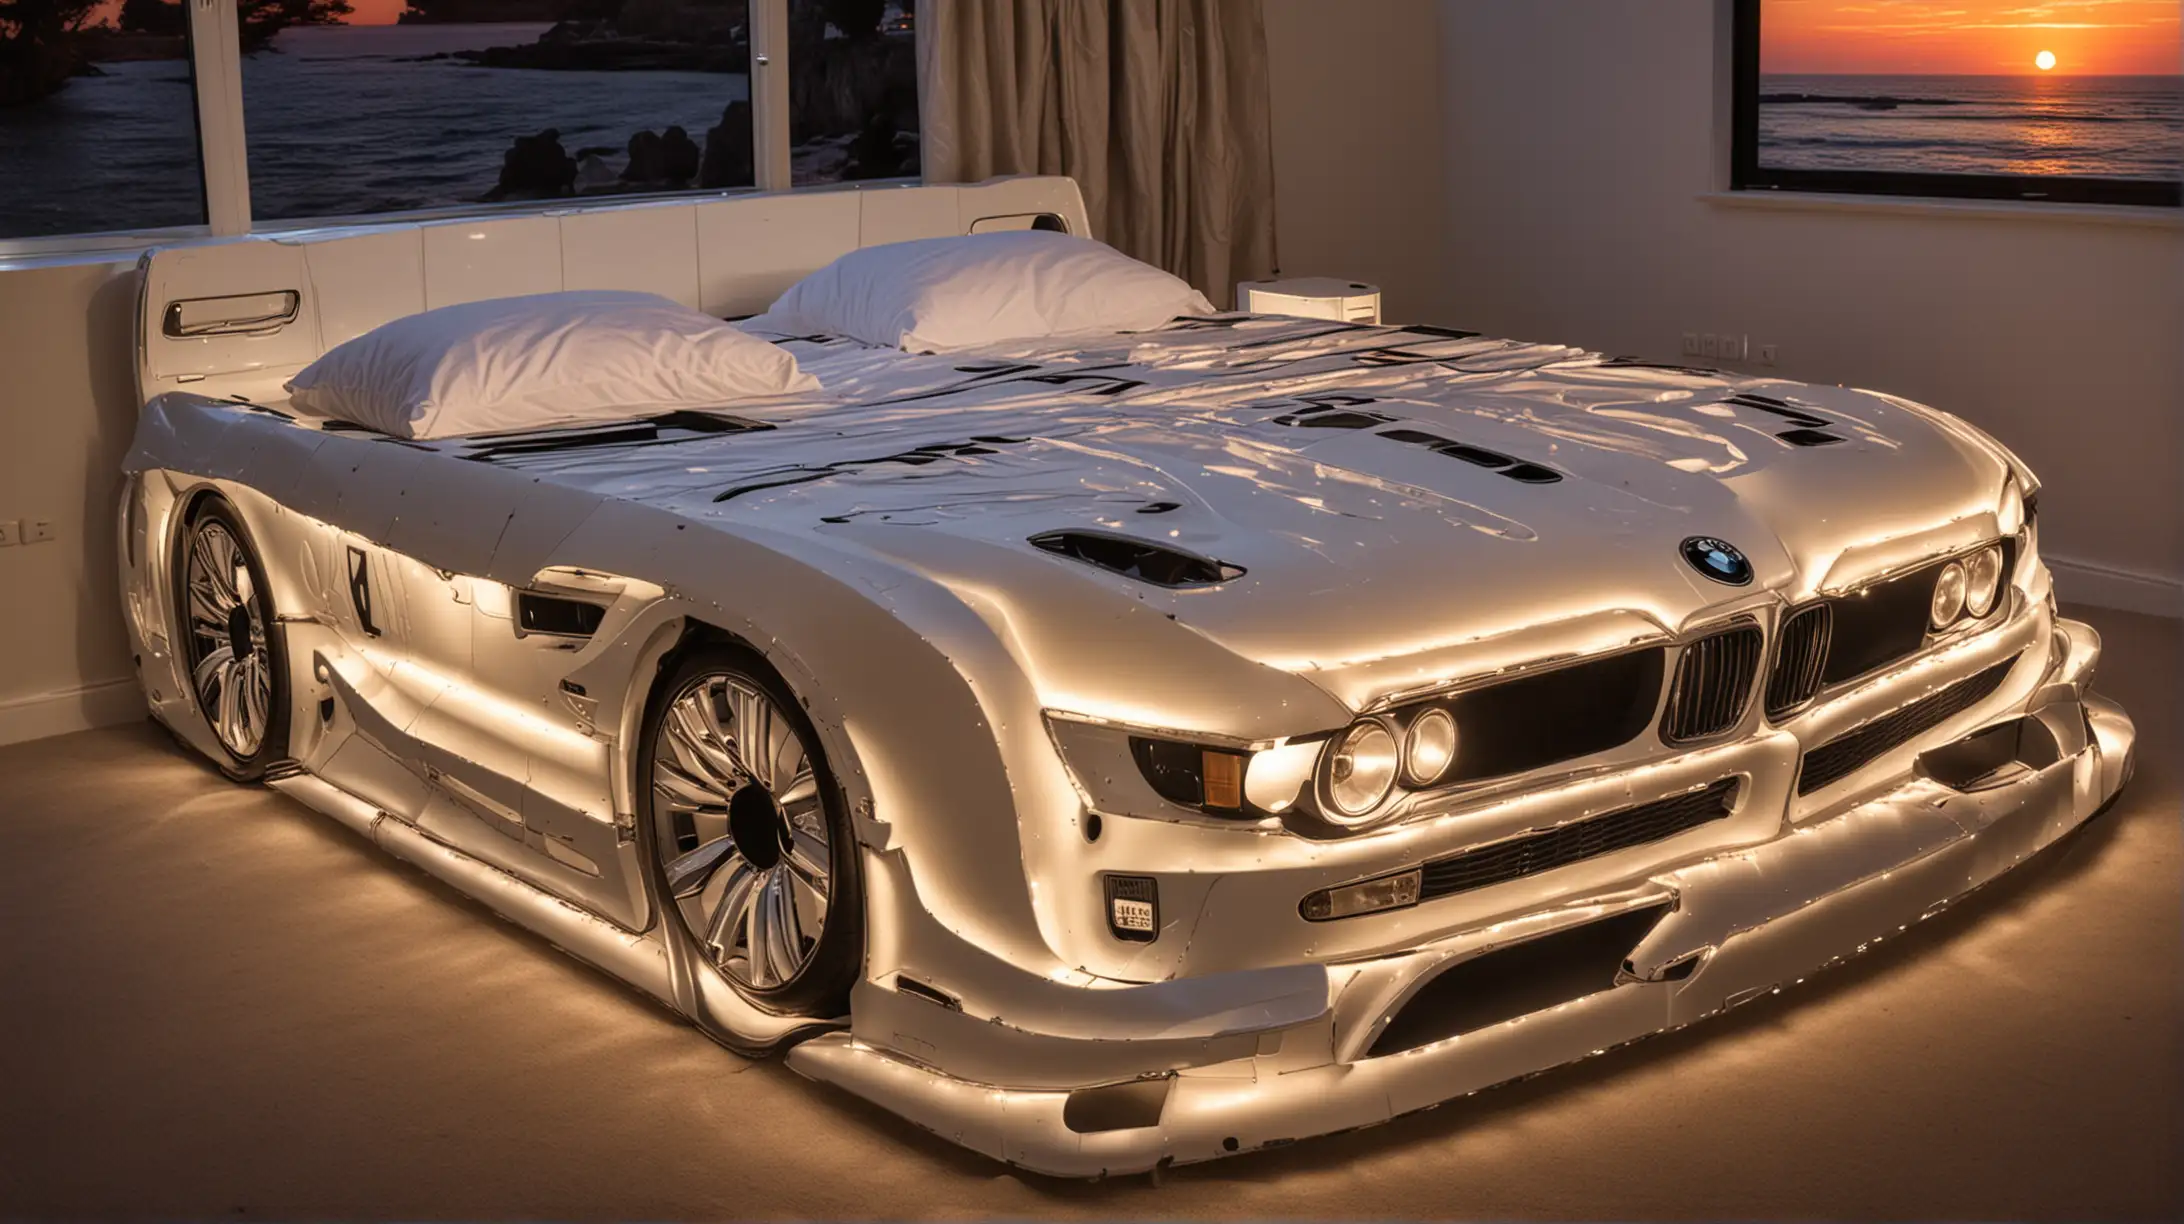 Luxury Double Bed Shaped Like a BMW Car with Illuminated Headlights and Sunset Imagery